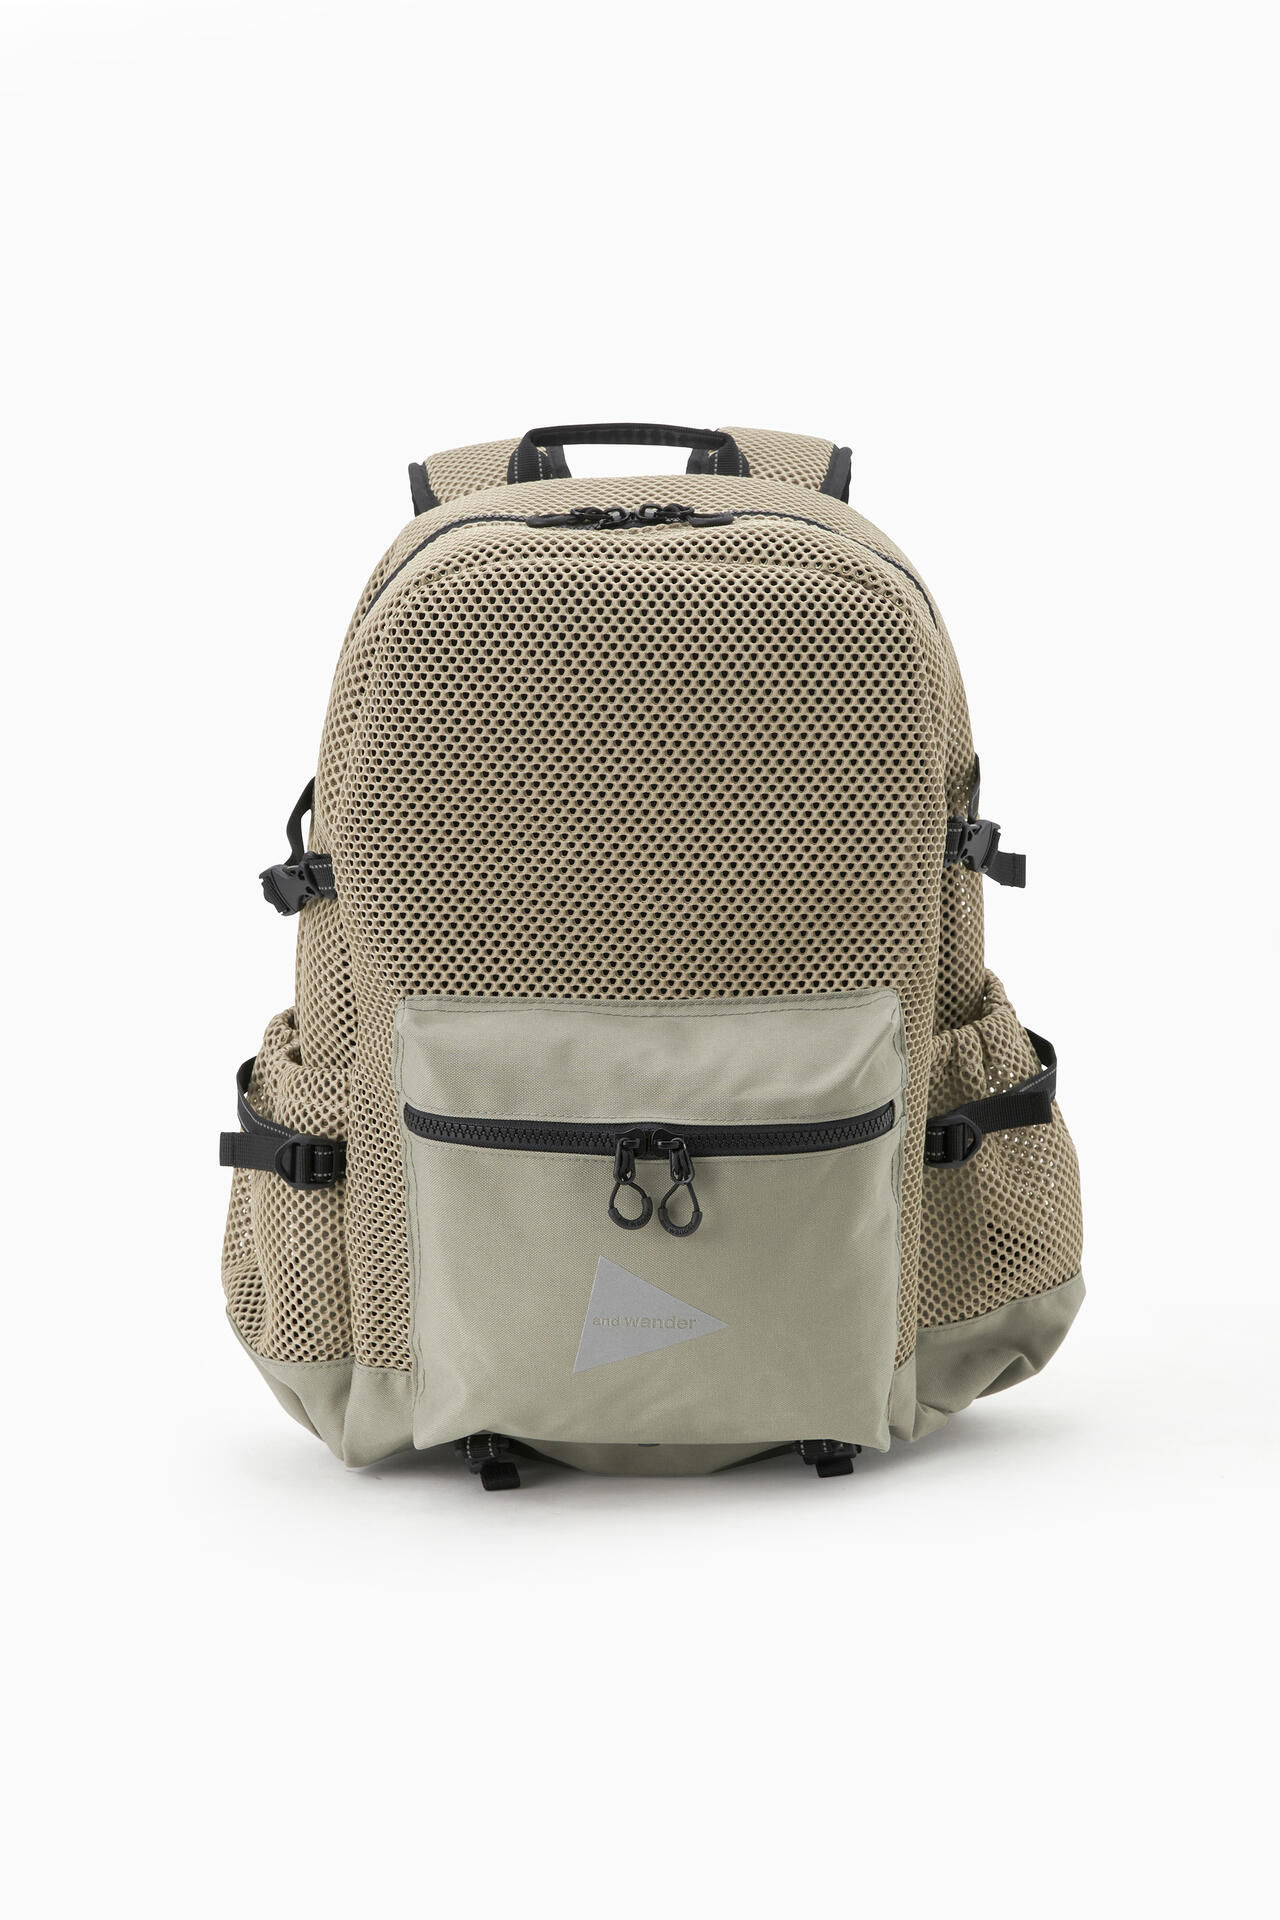 3D mesh backpack | backpack | and wander ONLINE STORE